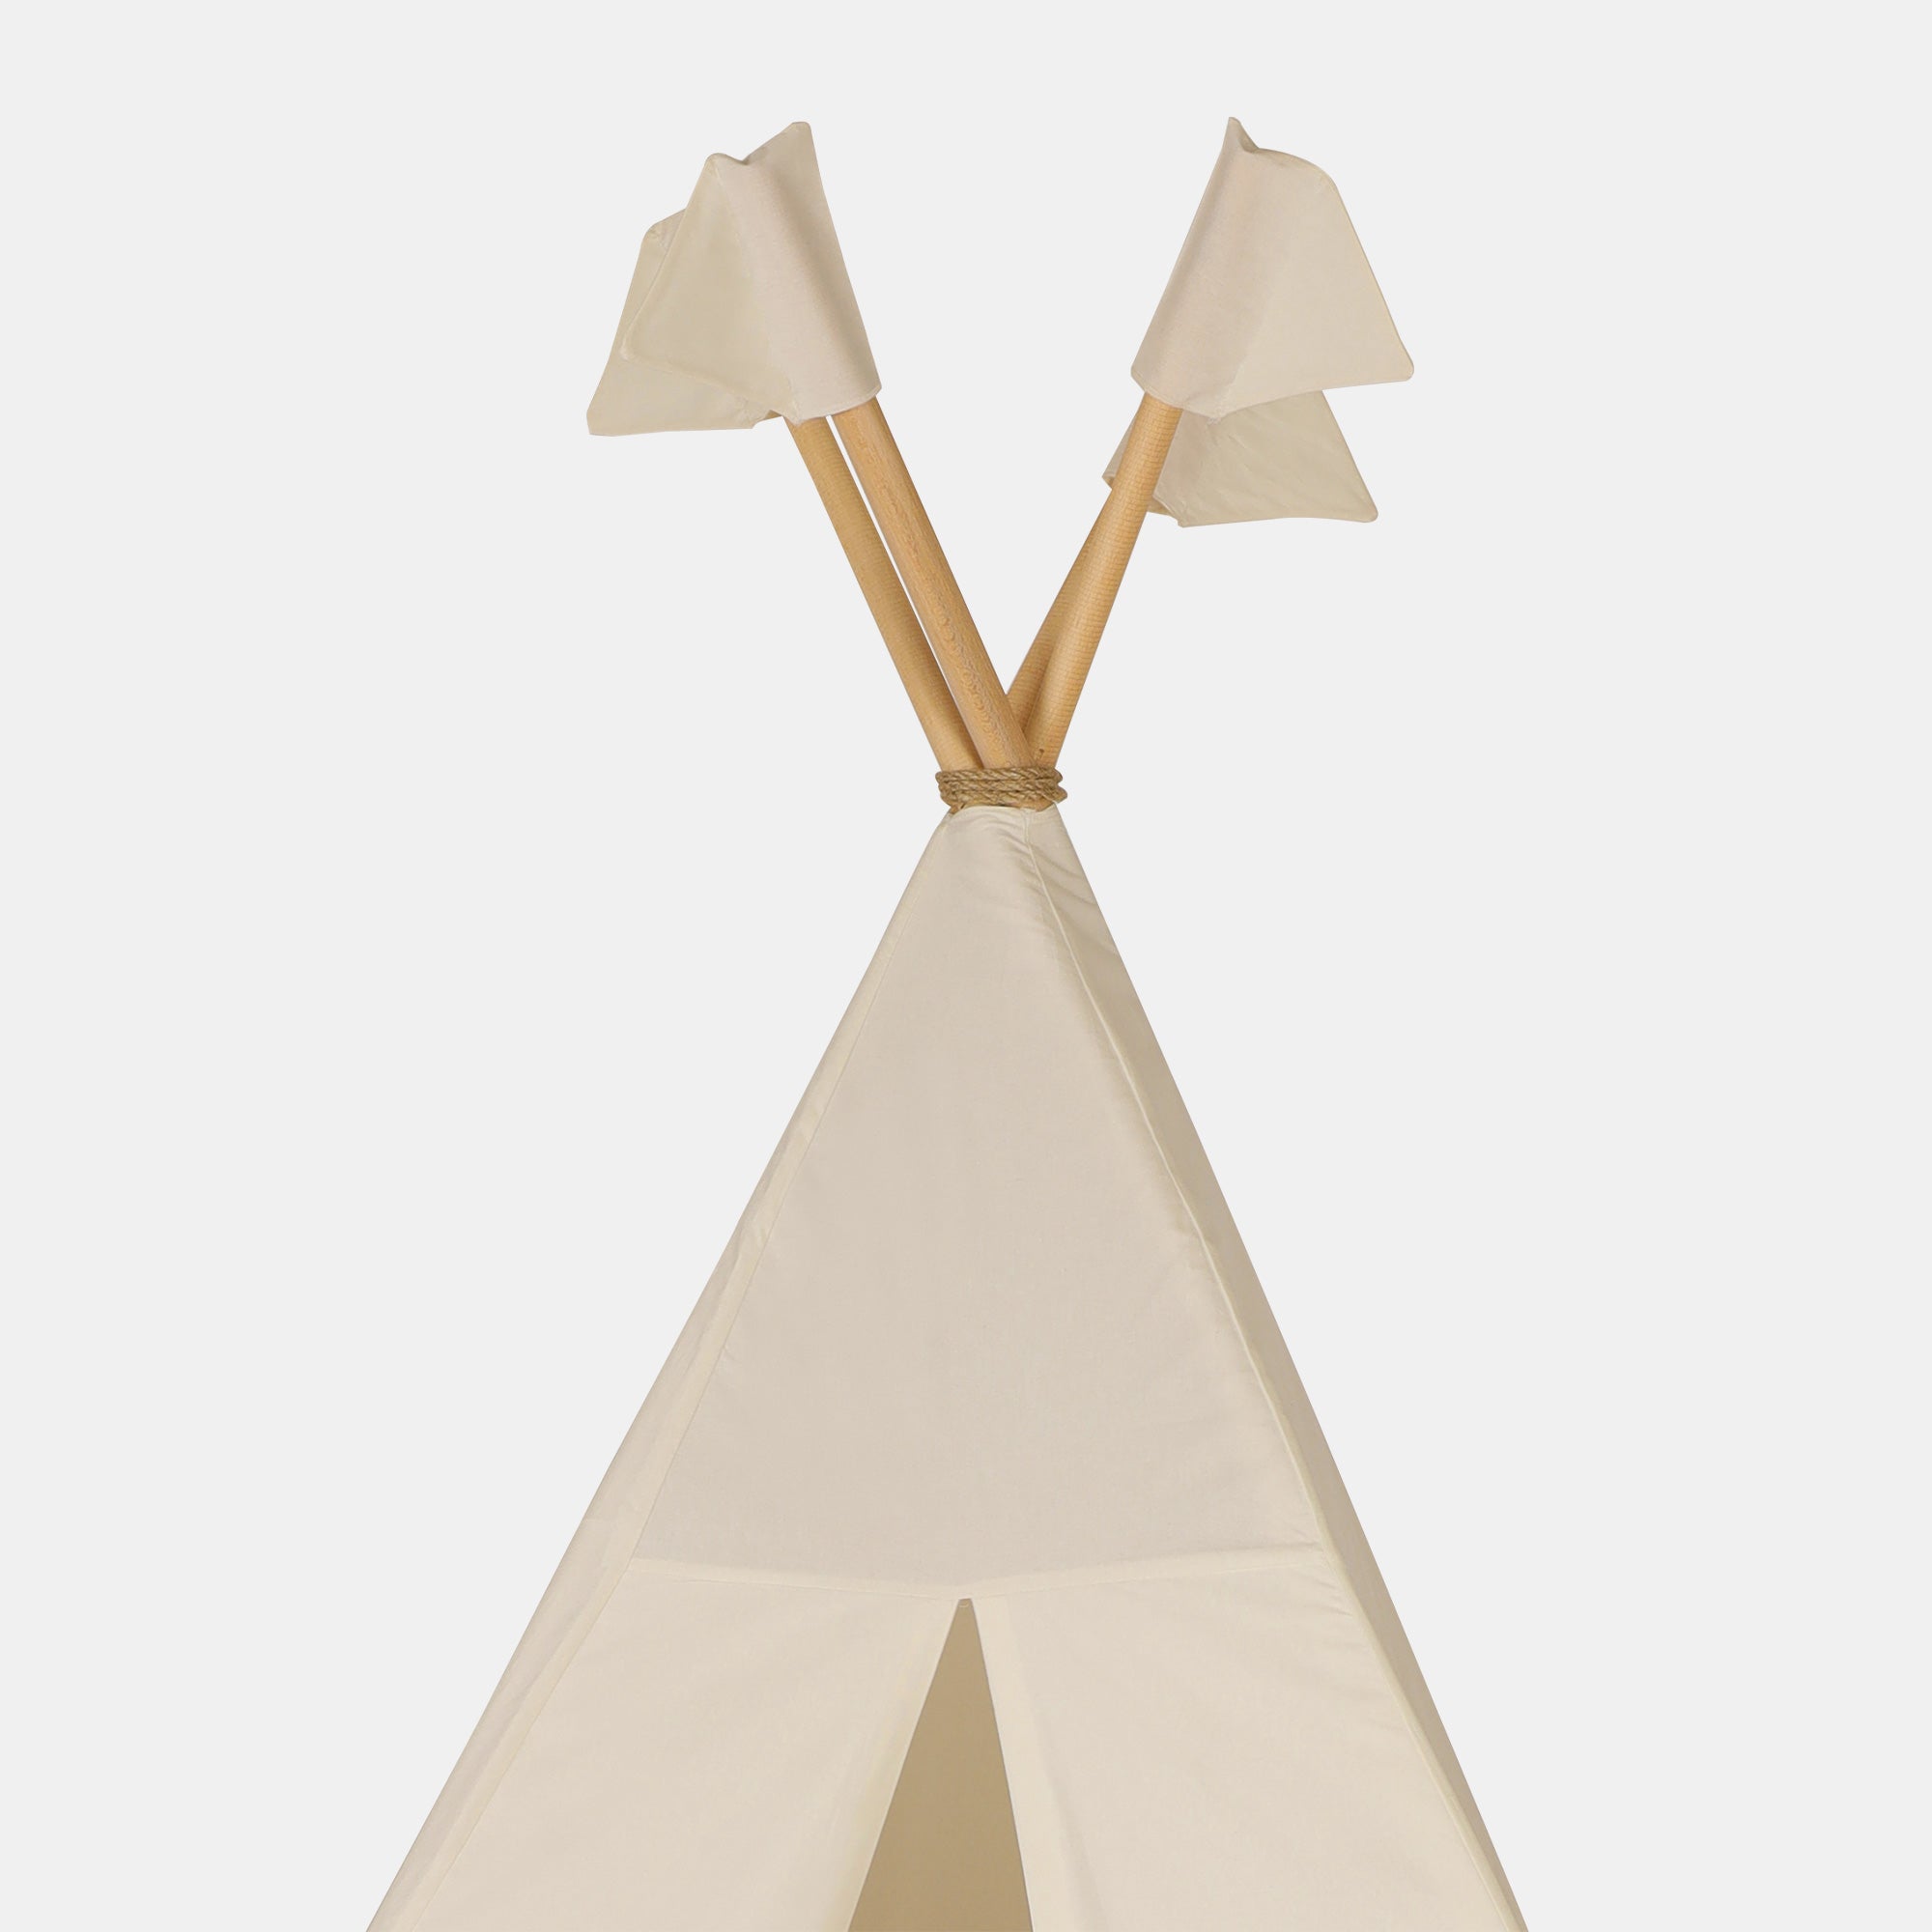 Pacific children's set: Pacific Ocean Style Teepee